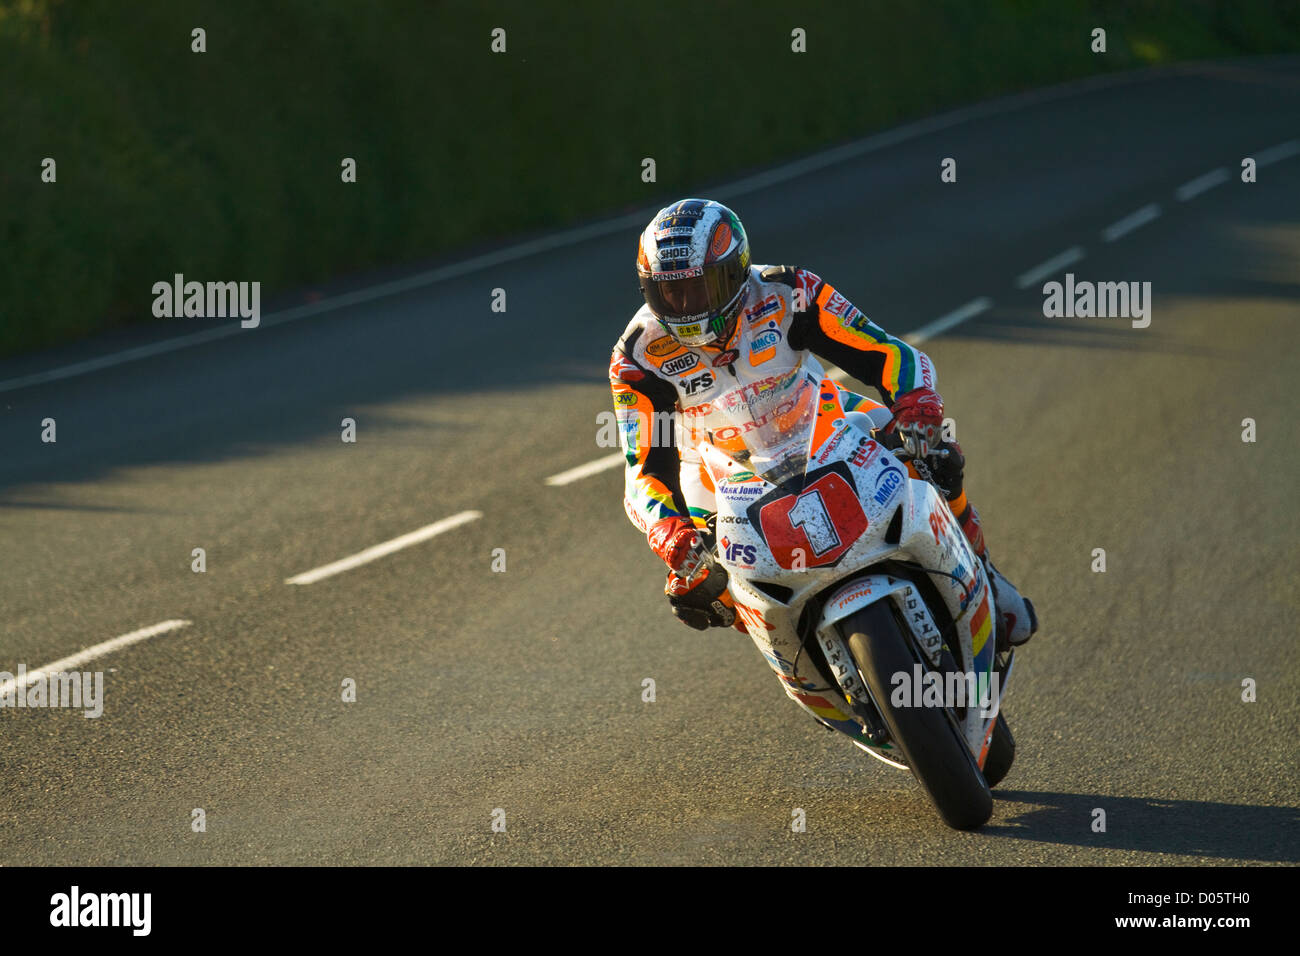 A photograph of John McGuinness approaching the 'Gooseneck' during the 2012 TT, on the Padgetts MMCG Superstock 1000. Stock Photo